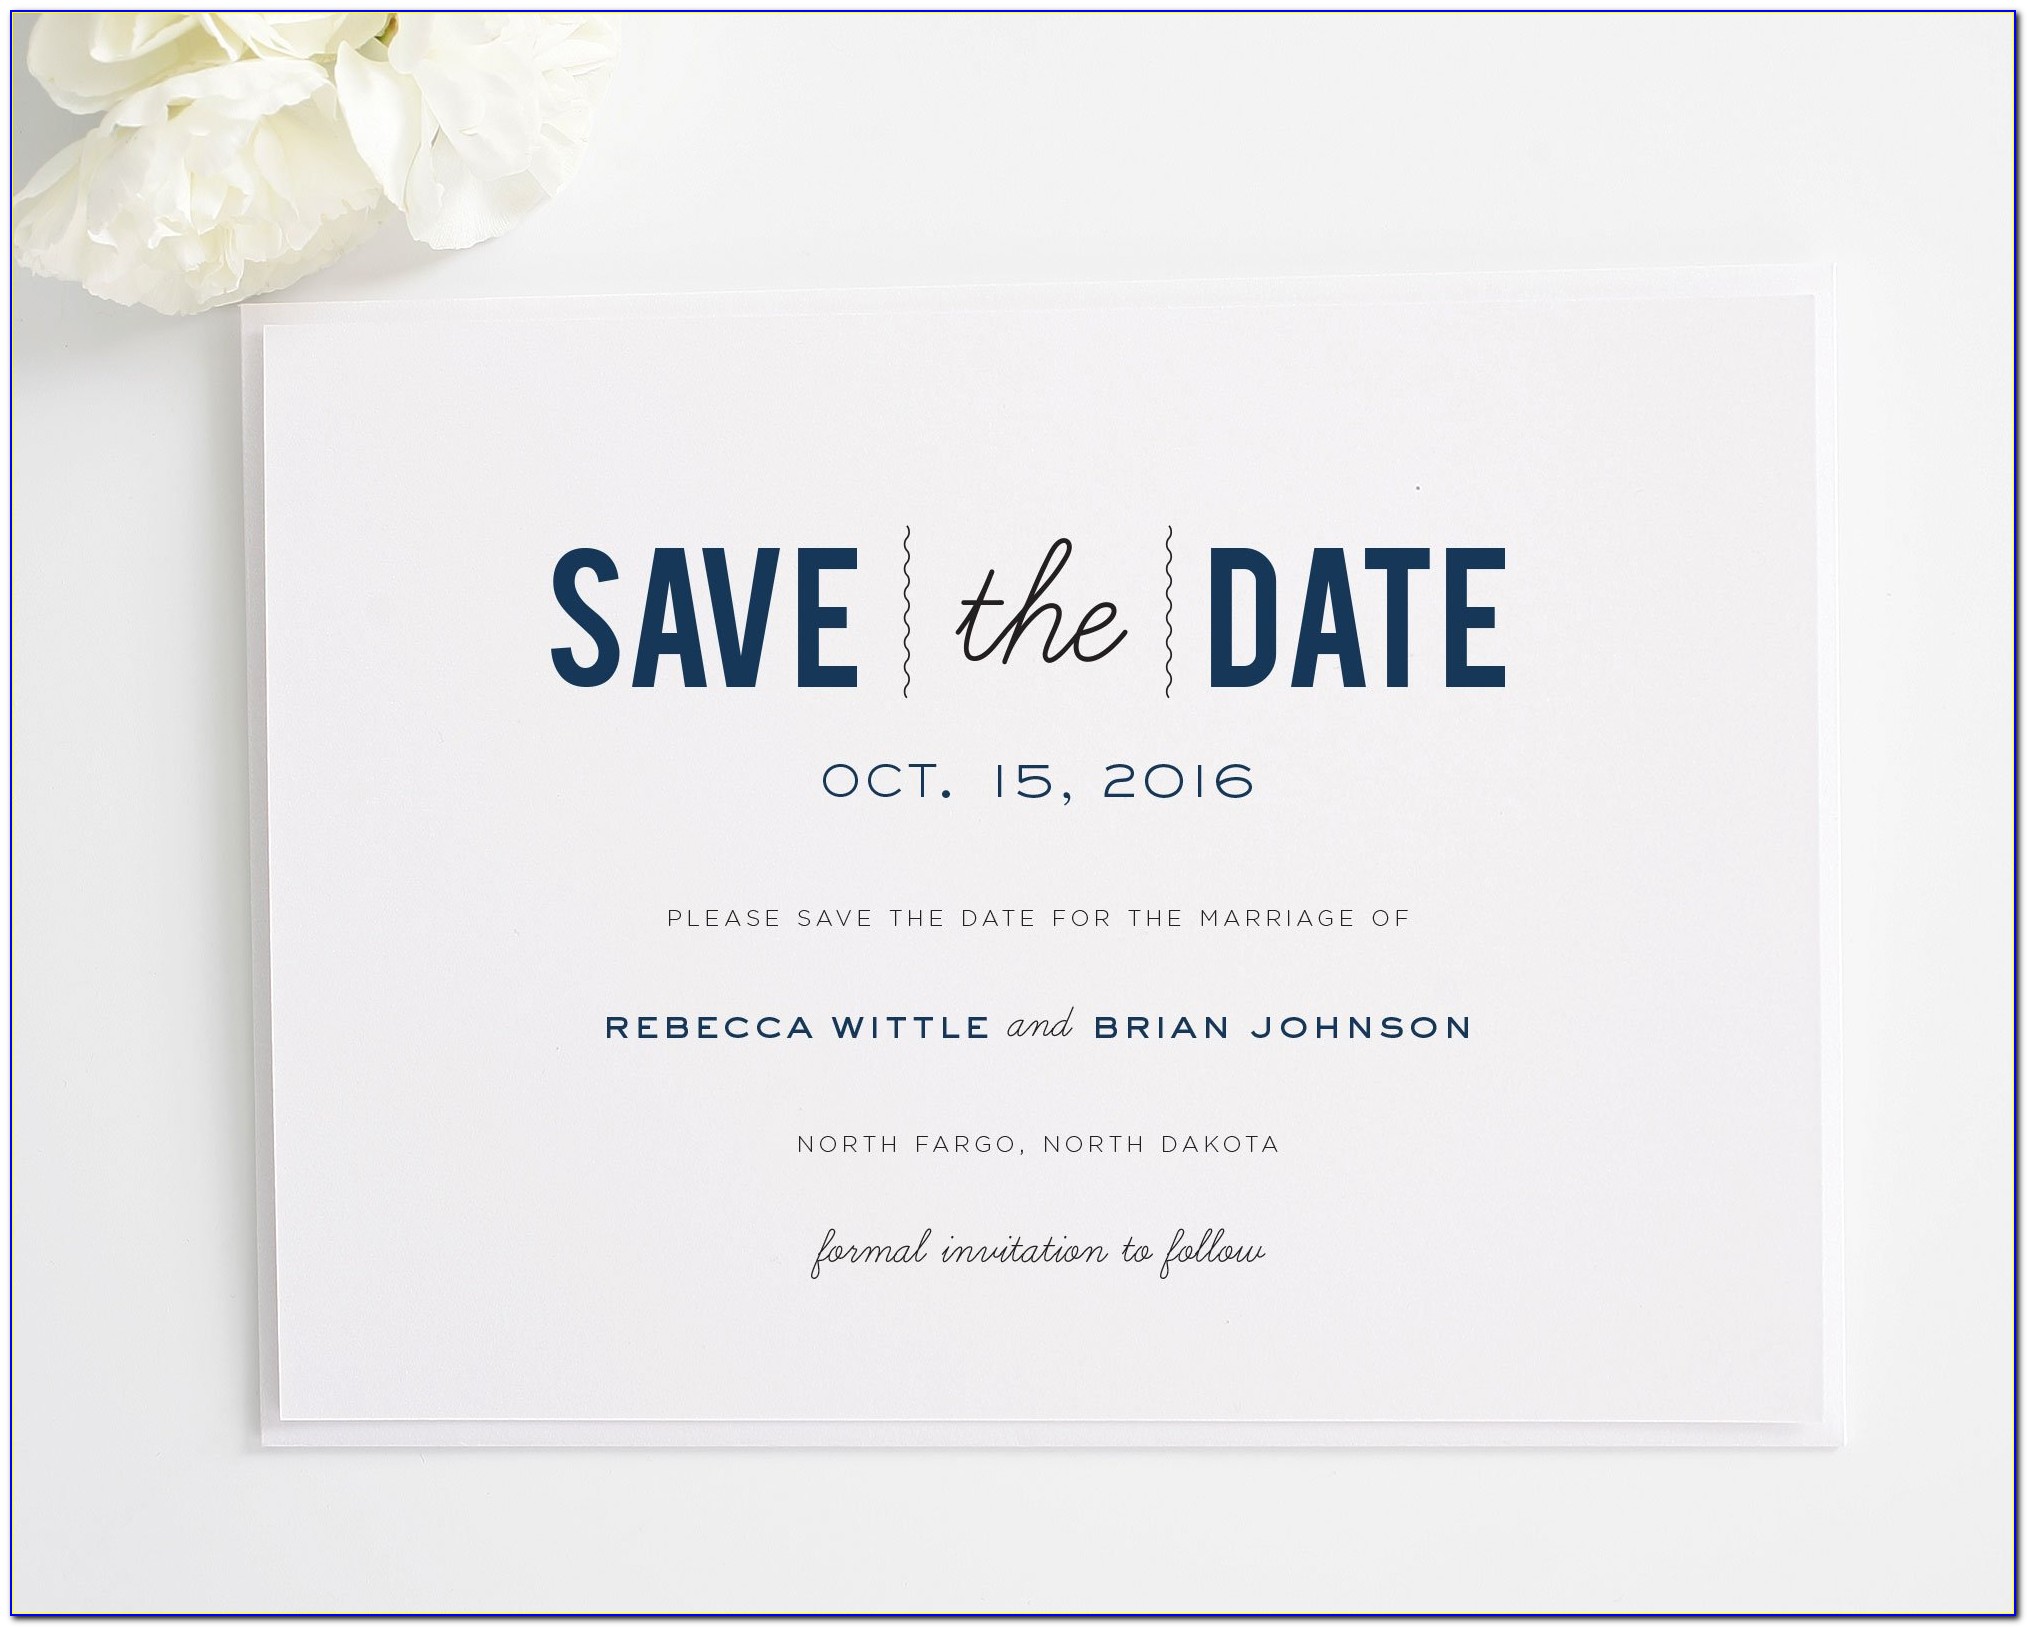 Save The Date Wedding Invitations Magnets